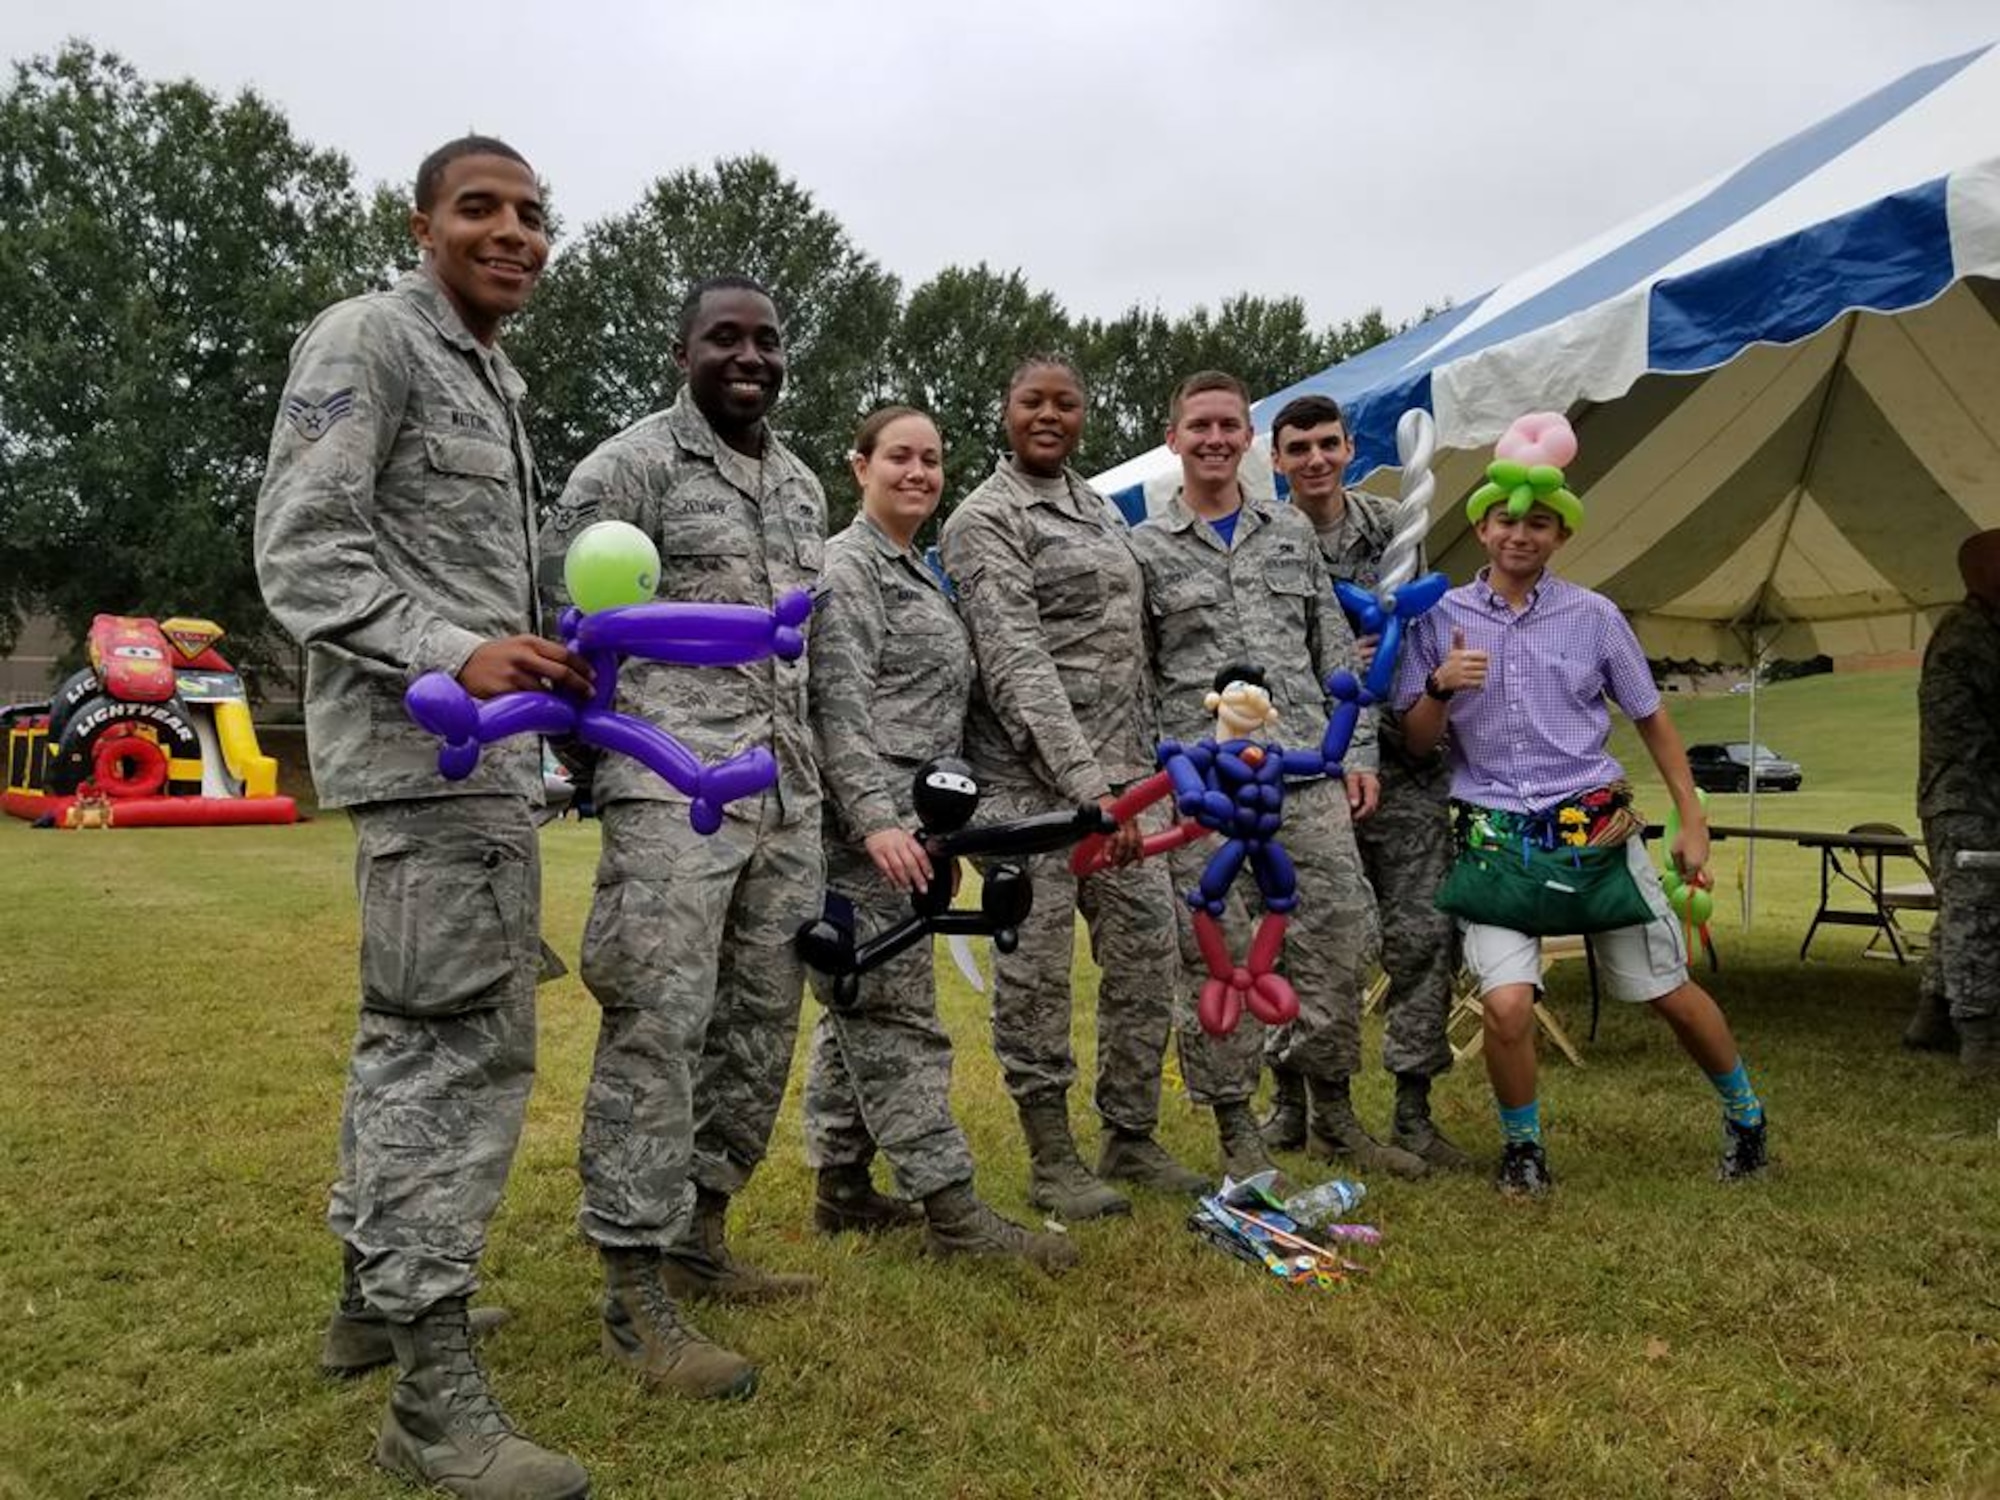 Reserve Citizen Airmen pose for a photo with their balloon animals at this year's Family Day Oct. 14, 2017 at Dobbins Air Reserve Base, Ga. Family Day is held here annually as a way of bringing families on base to see what their Reserve Citizen Airmen do on drill weekends. (U.S. Air Force photo/Senior Airman Lauren Douglas)